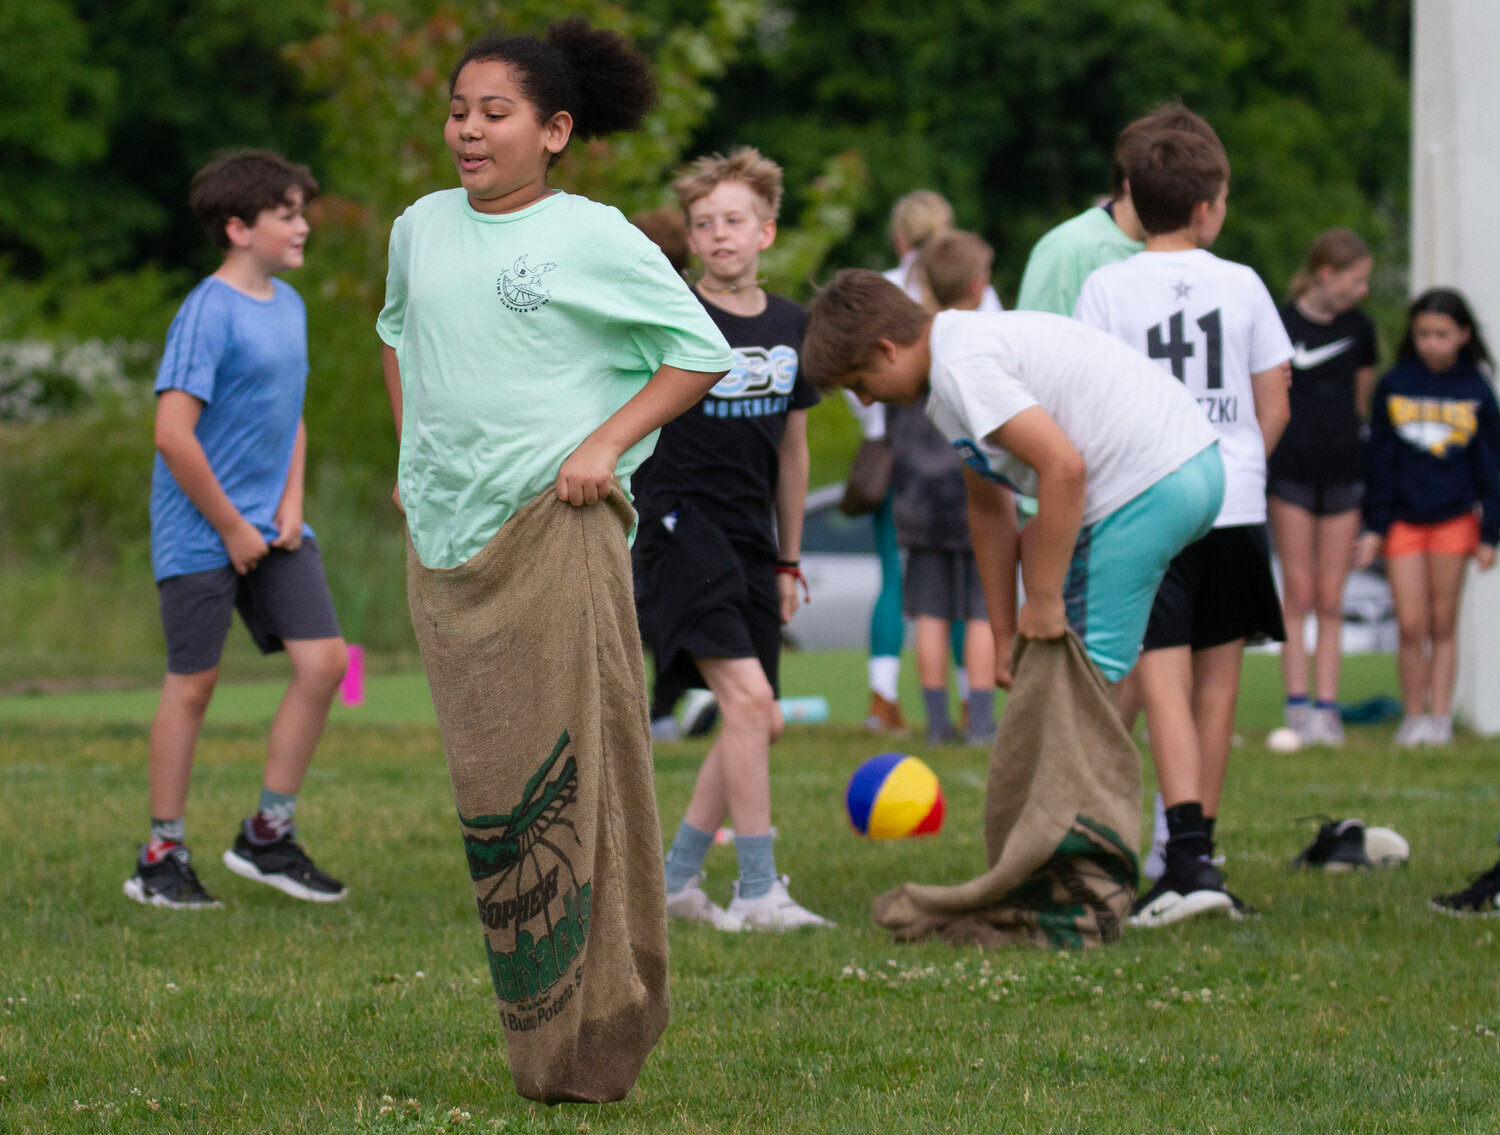 JR Breen competes in the sack race event during the Lime Cluster Field Day at Barrington Middle School on Friday.